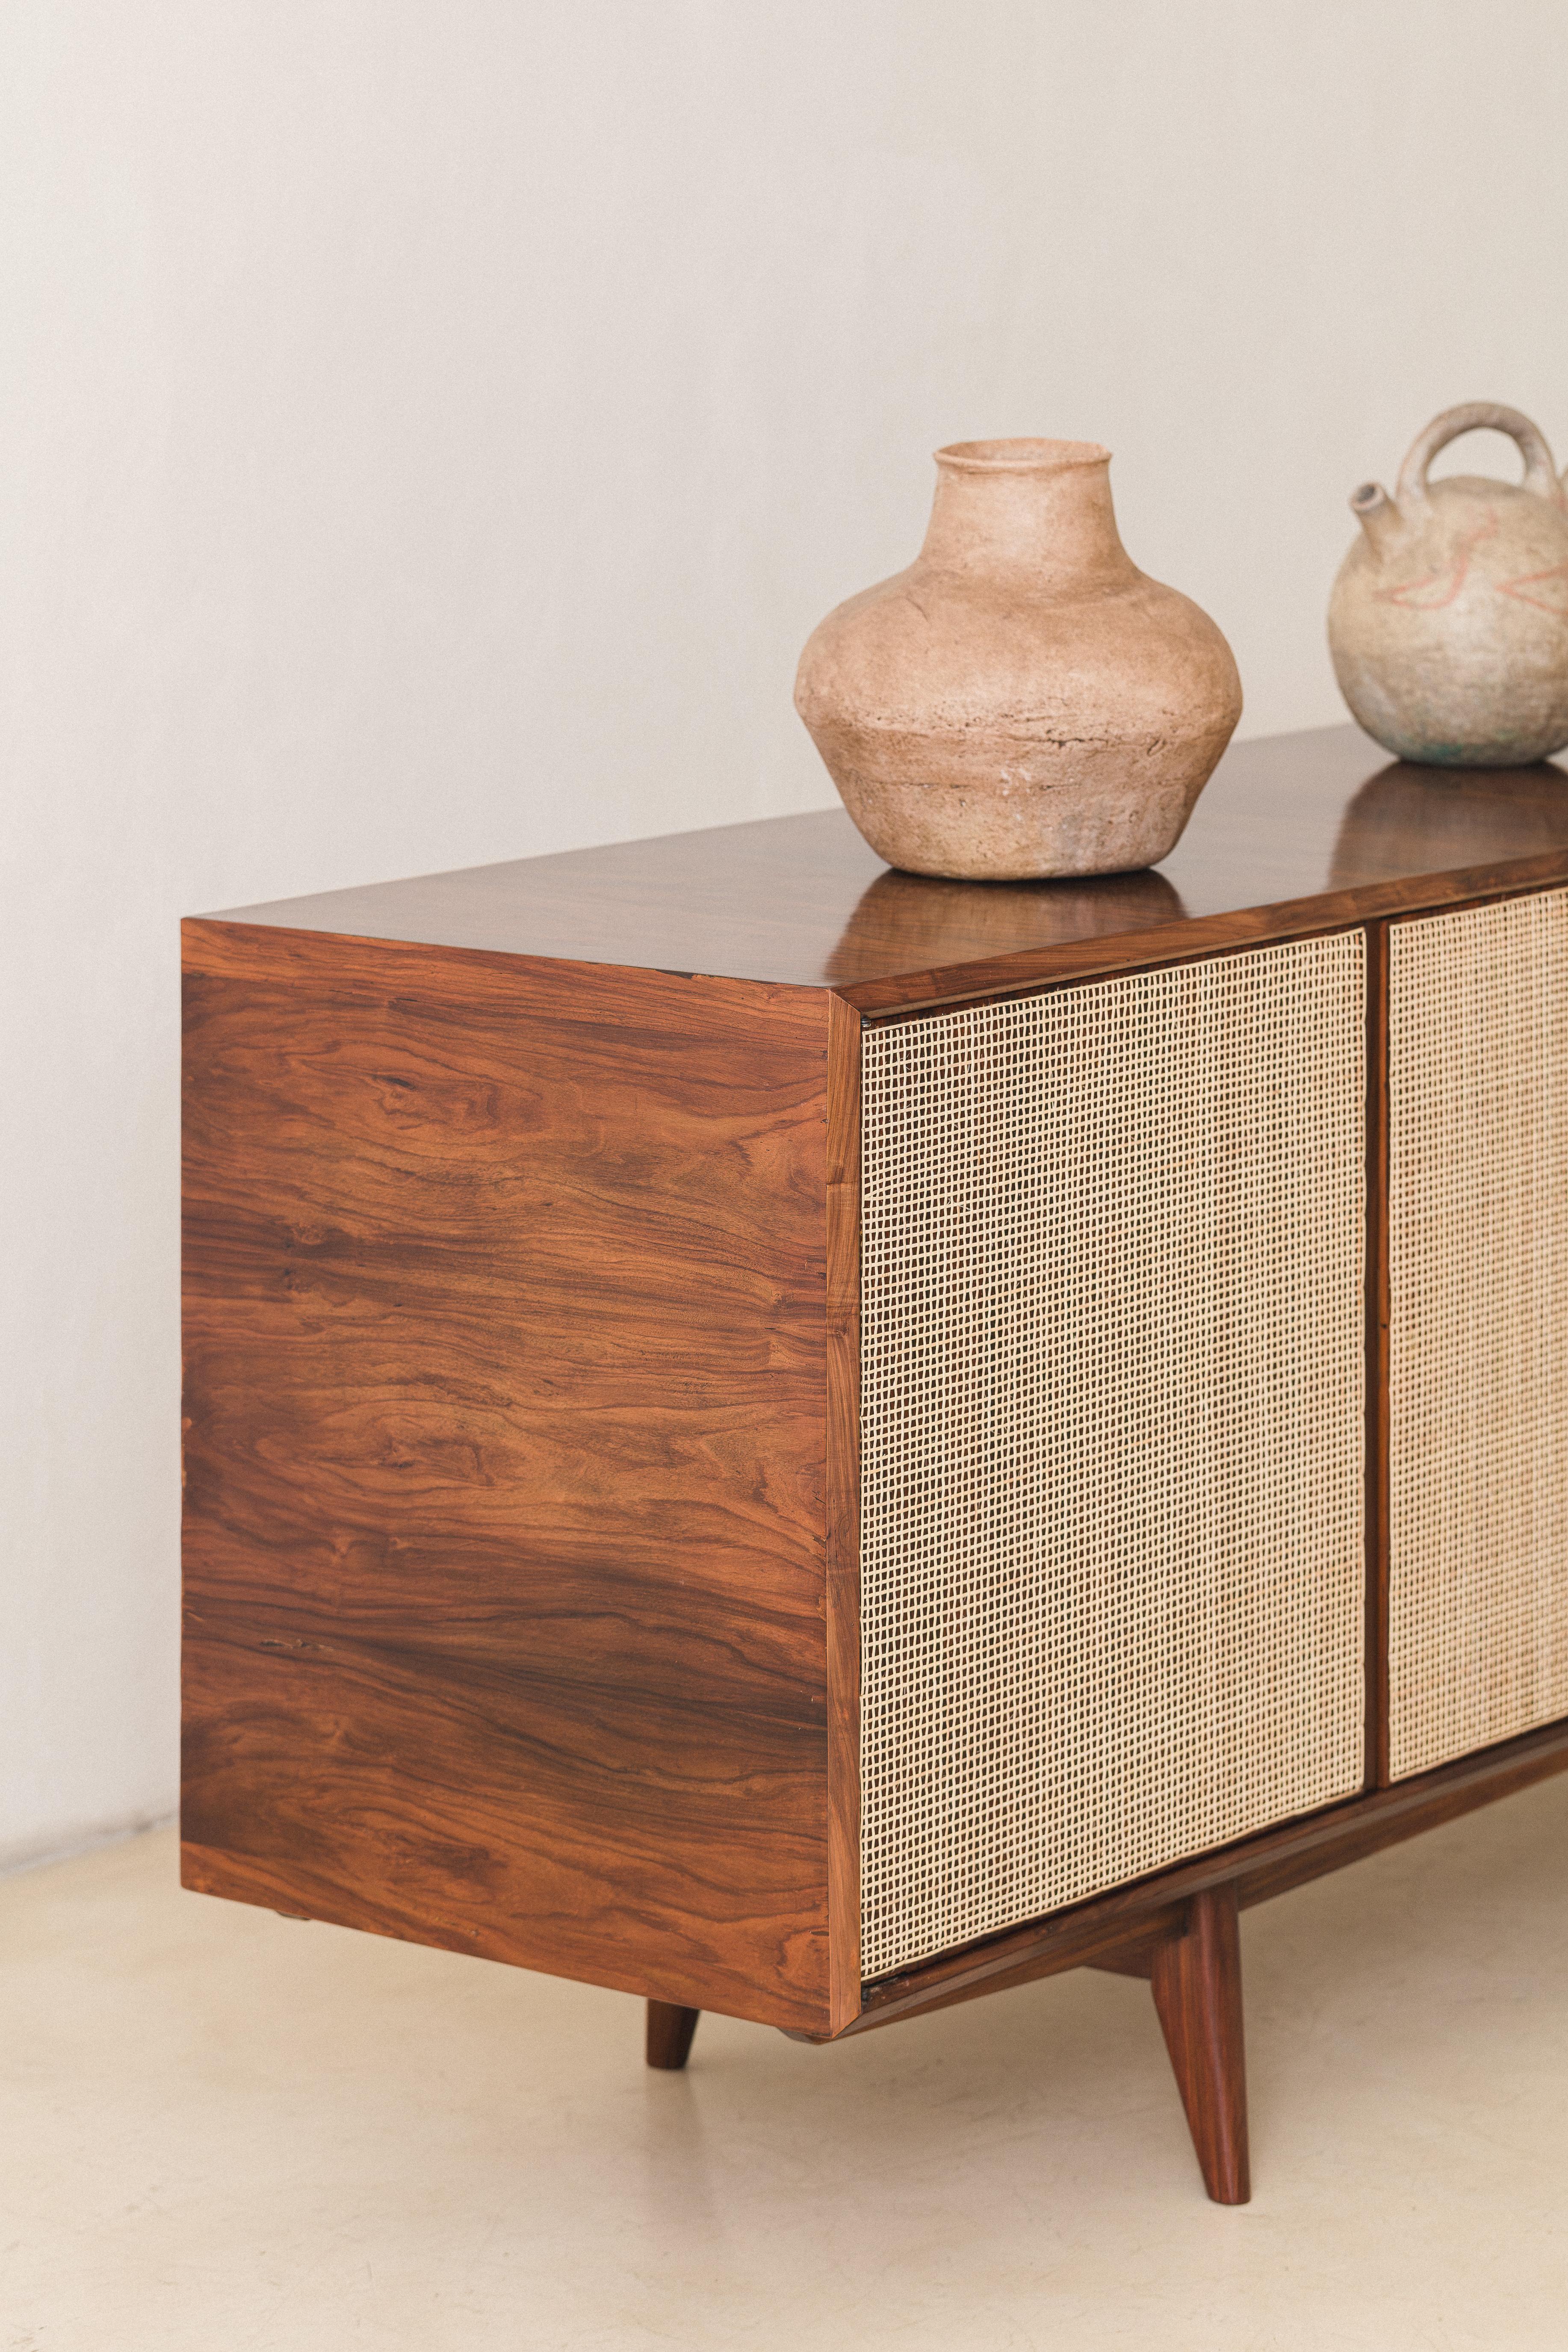 Wood Credenza, Unknown, Caviuna and Cane, c. 1955 For Sale